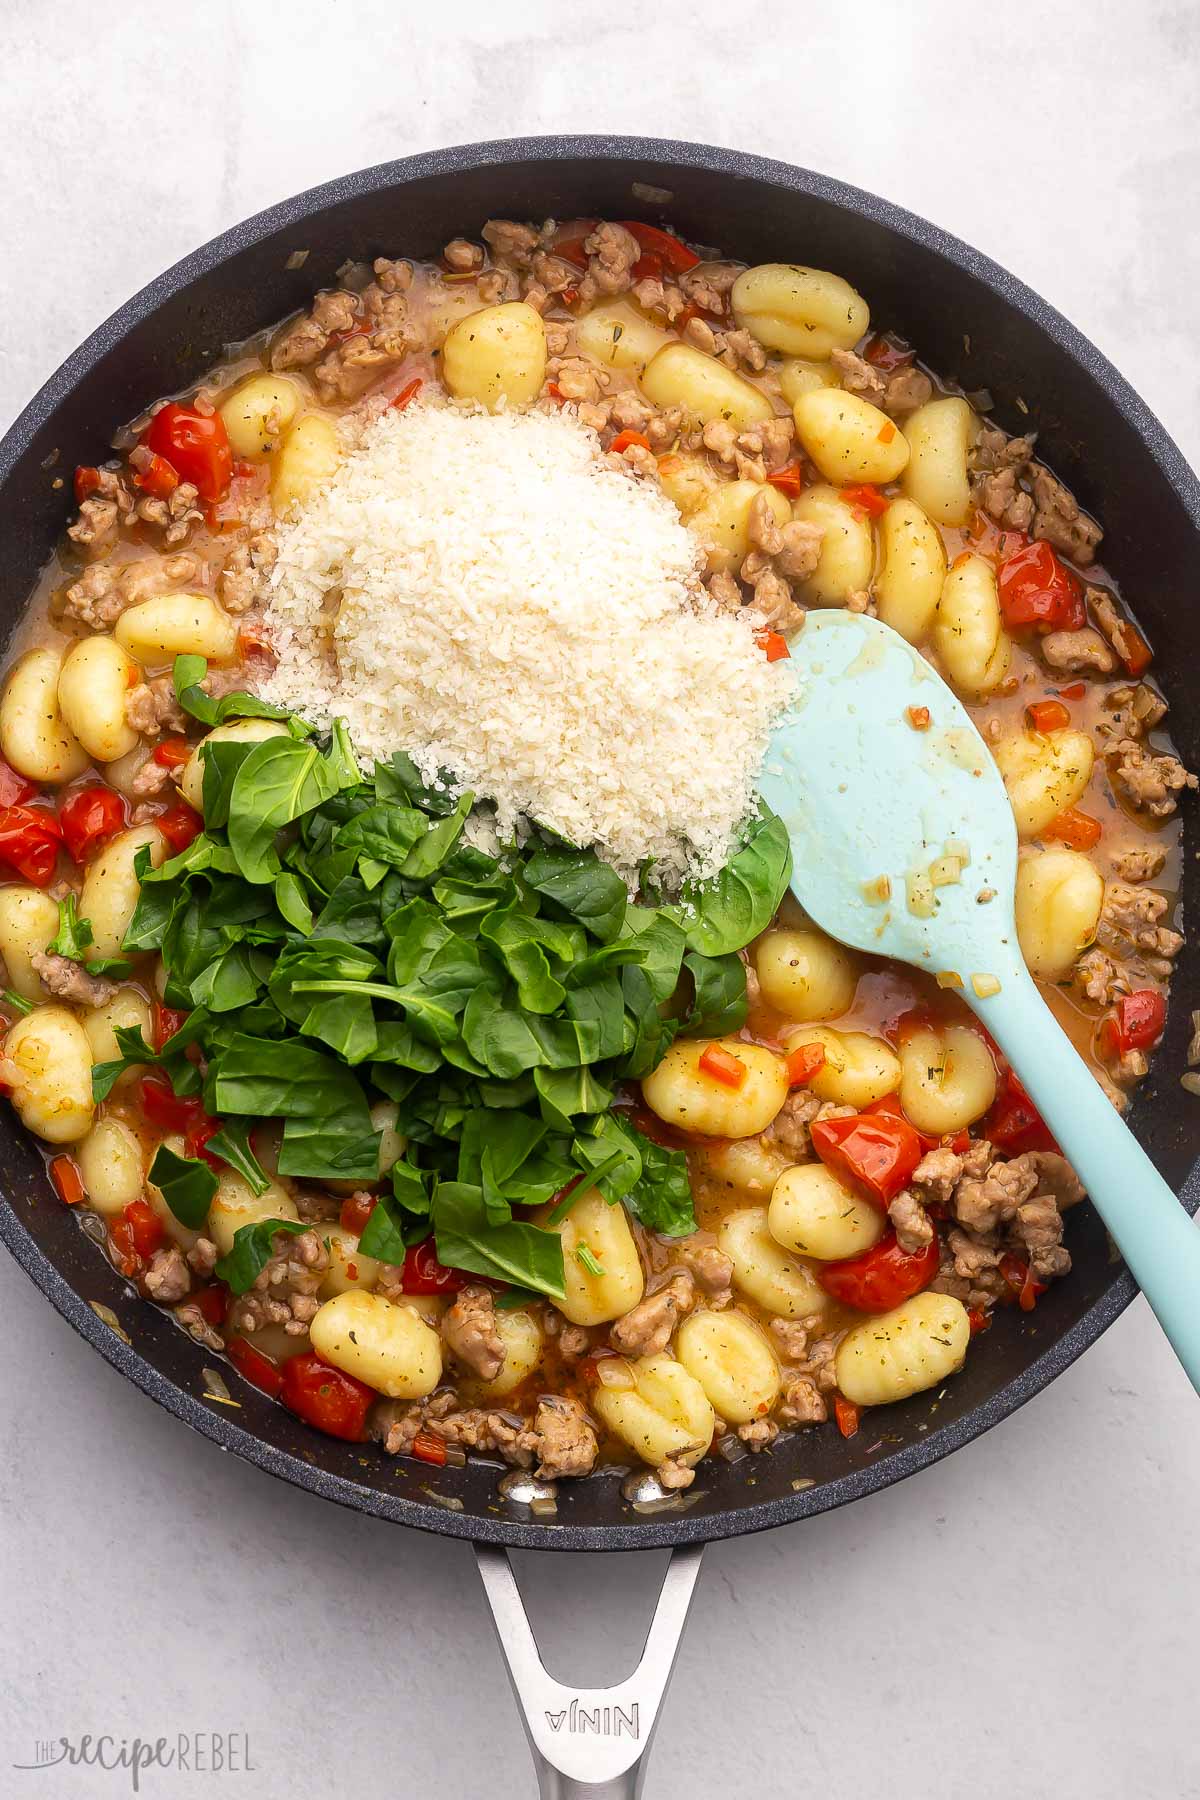 Top view of a black pan with a sausage mix, gnocchi, chopped tomatoes in the bottom, and a spatula in the mix, with grated parmesan cheese and spinach leaves on top.